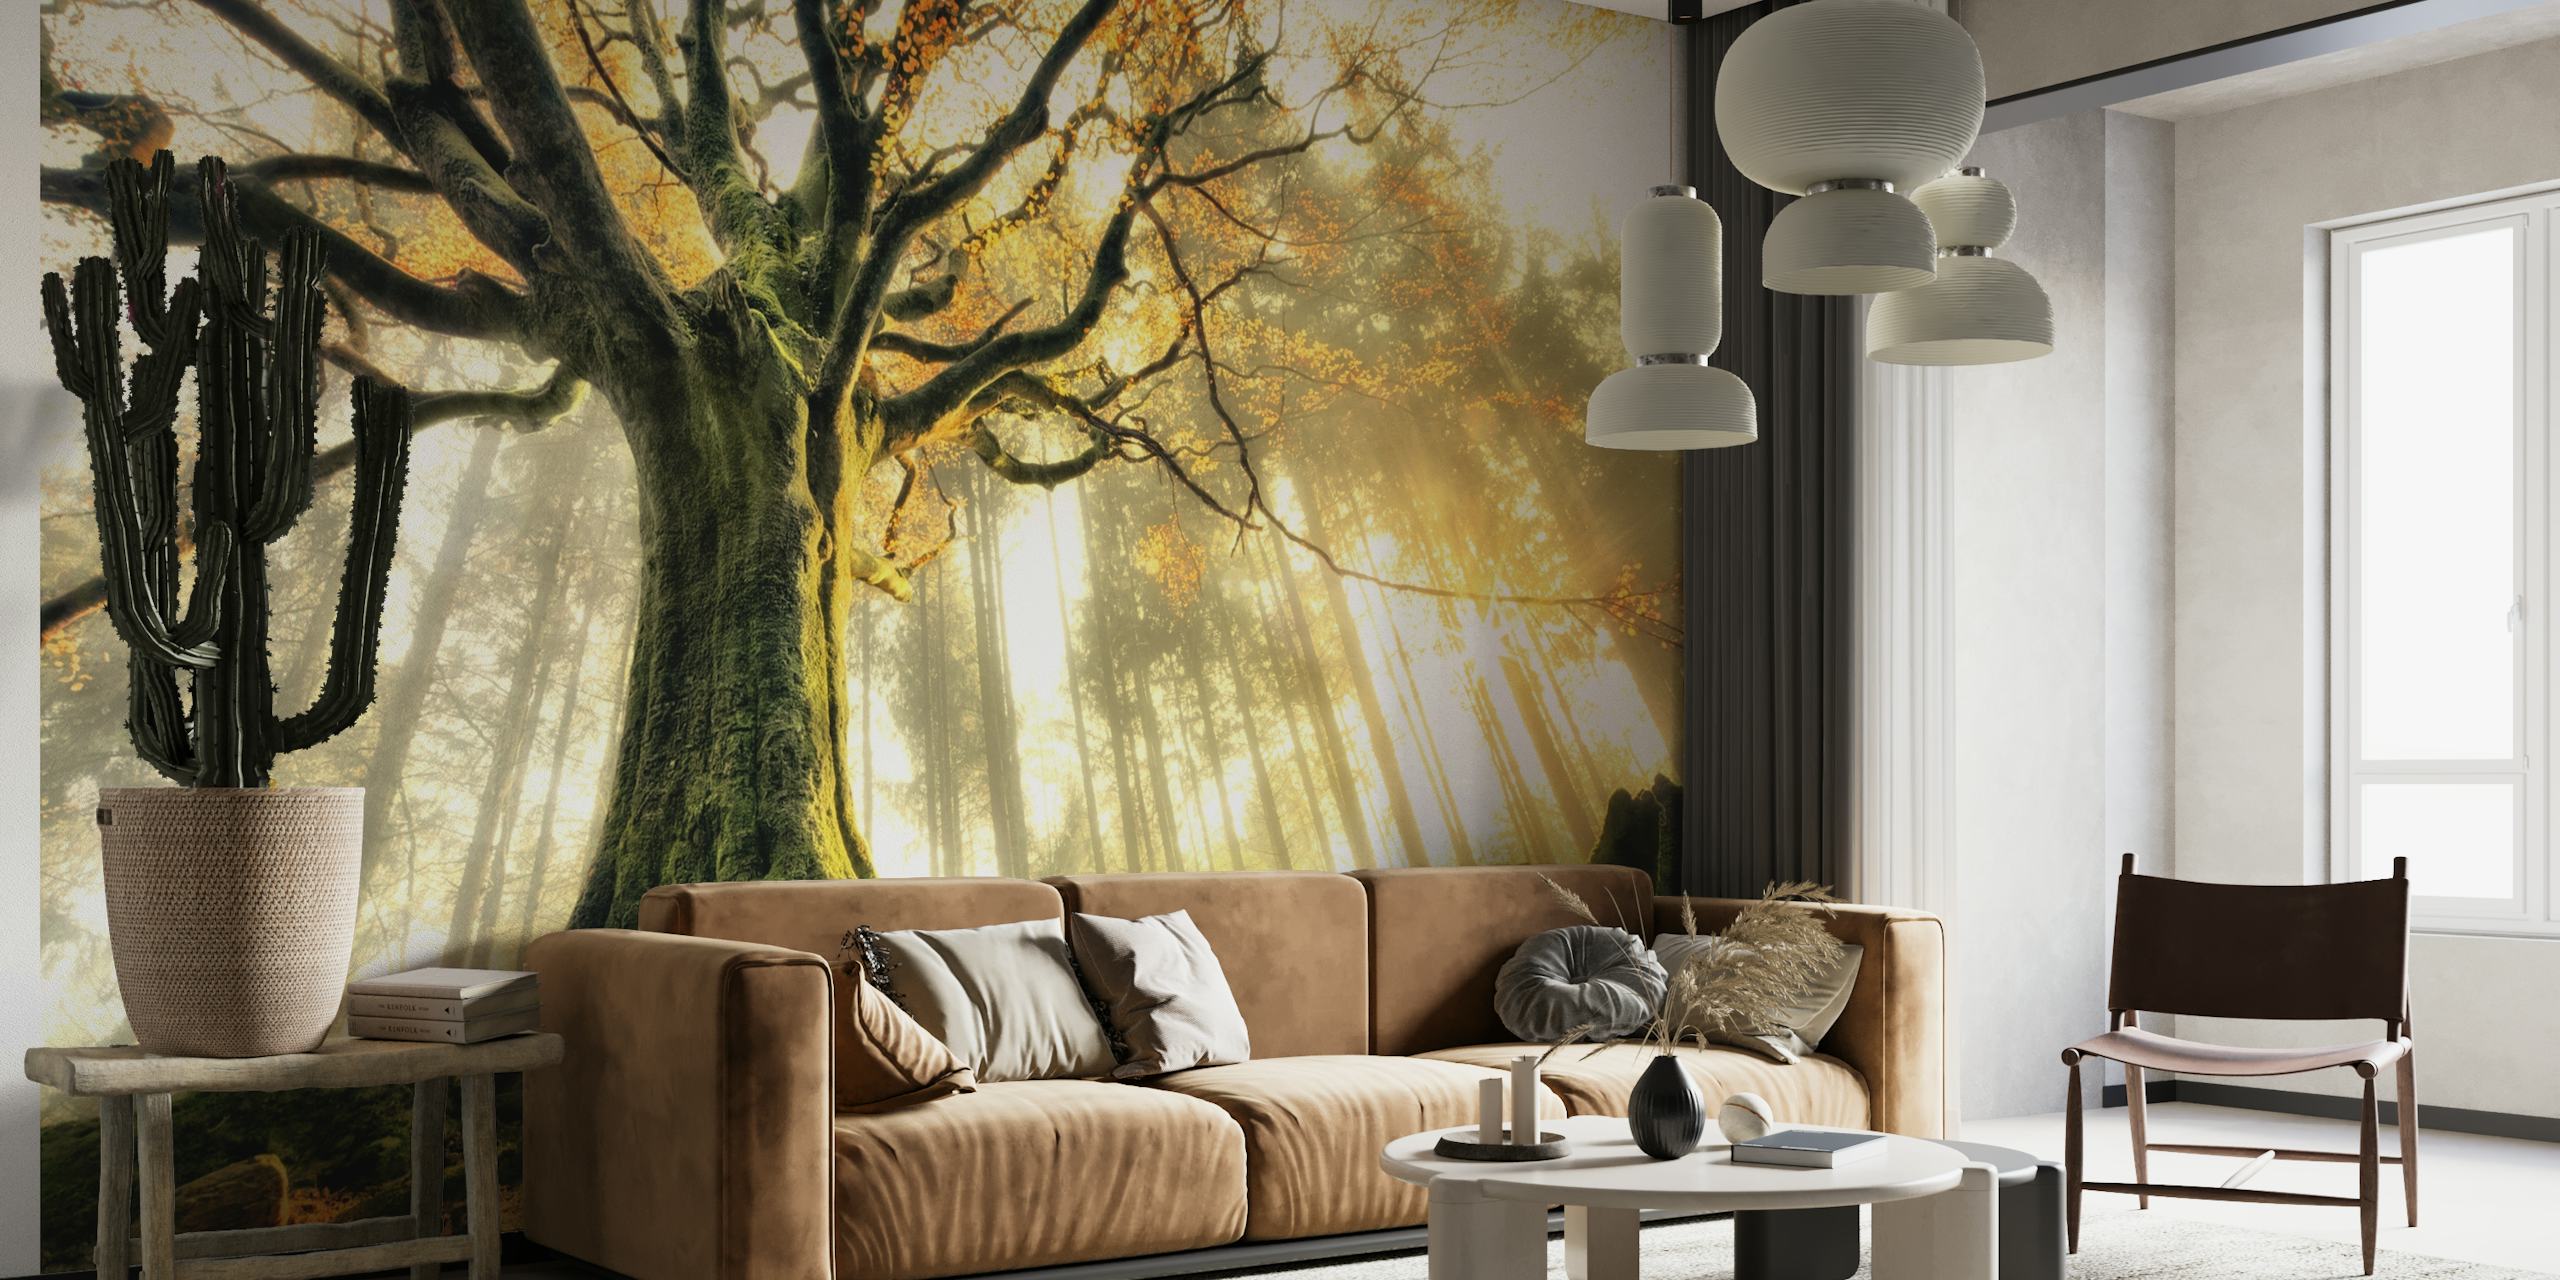 Autumn forest wall mural with a majestic tree and sunlight filtering through mist